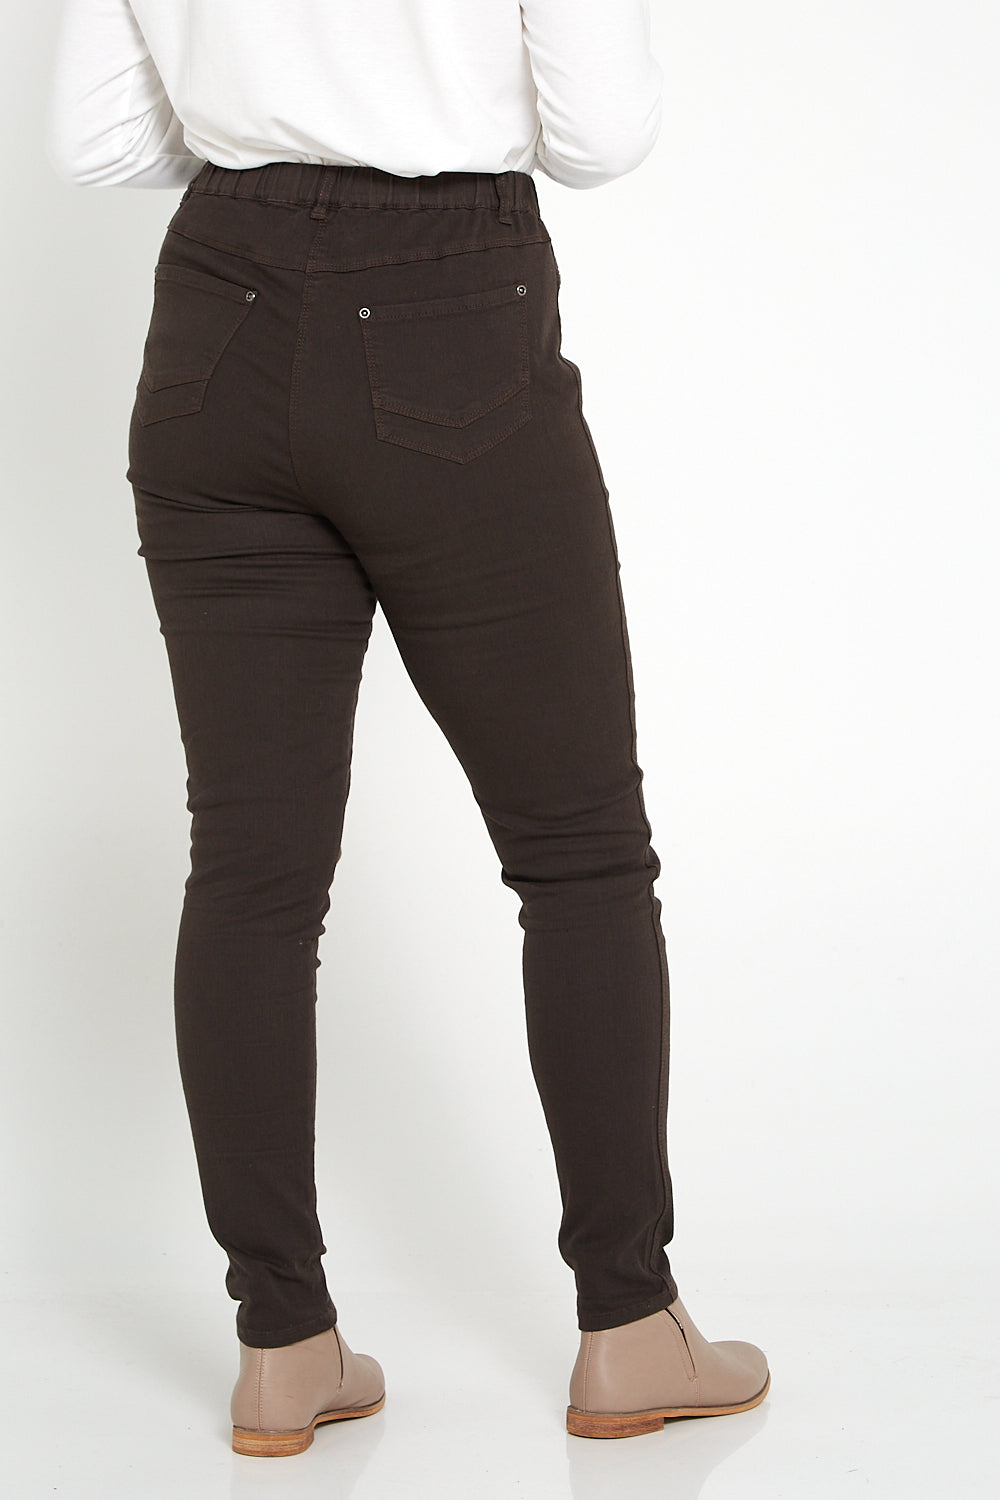 Denver Jeggings - Chocolate  Cafe Latte Ankle Length Pull On Jeggings –  TULIO Fashion